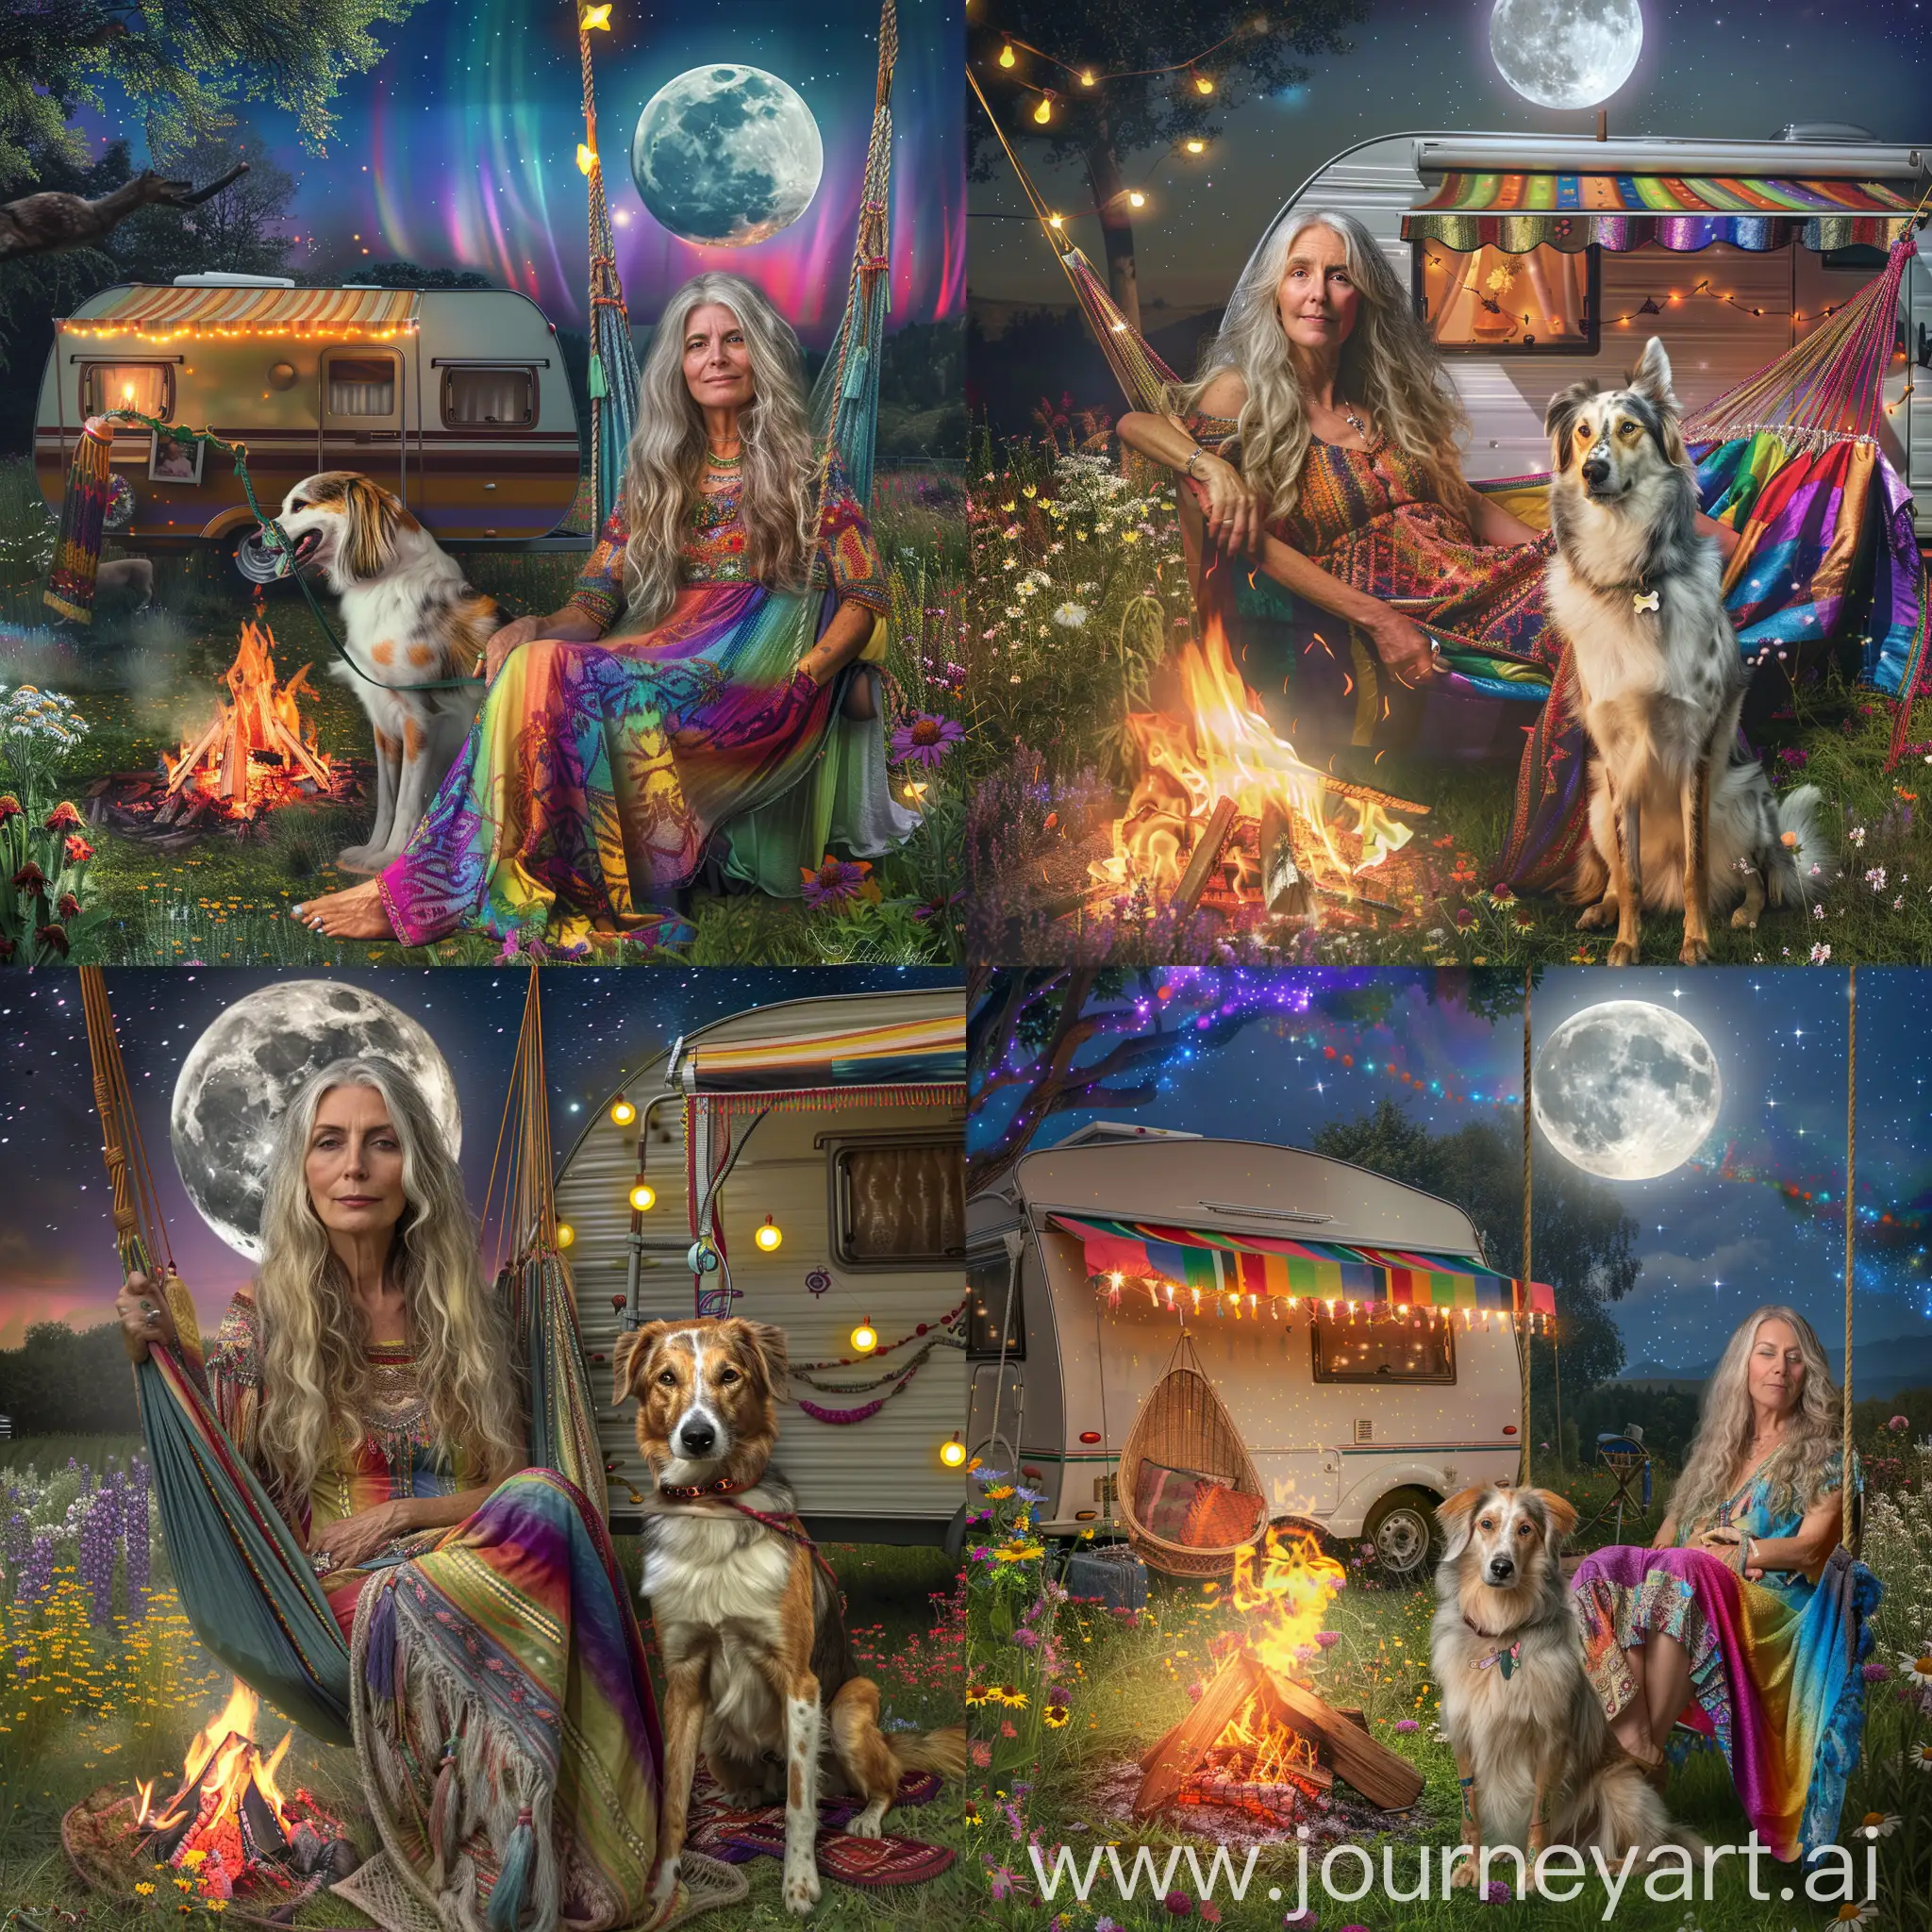 Moonlit-Serenity-Bohemian-Woman-and-Borzoi-in-Rainbow-Meadow